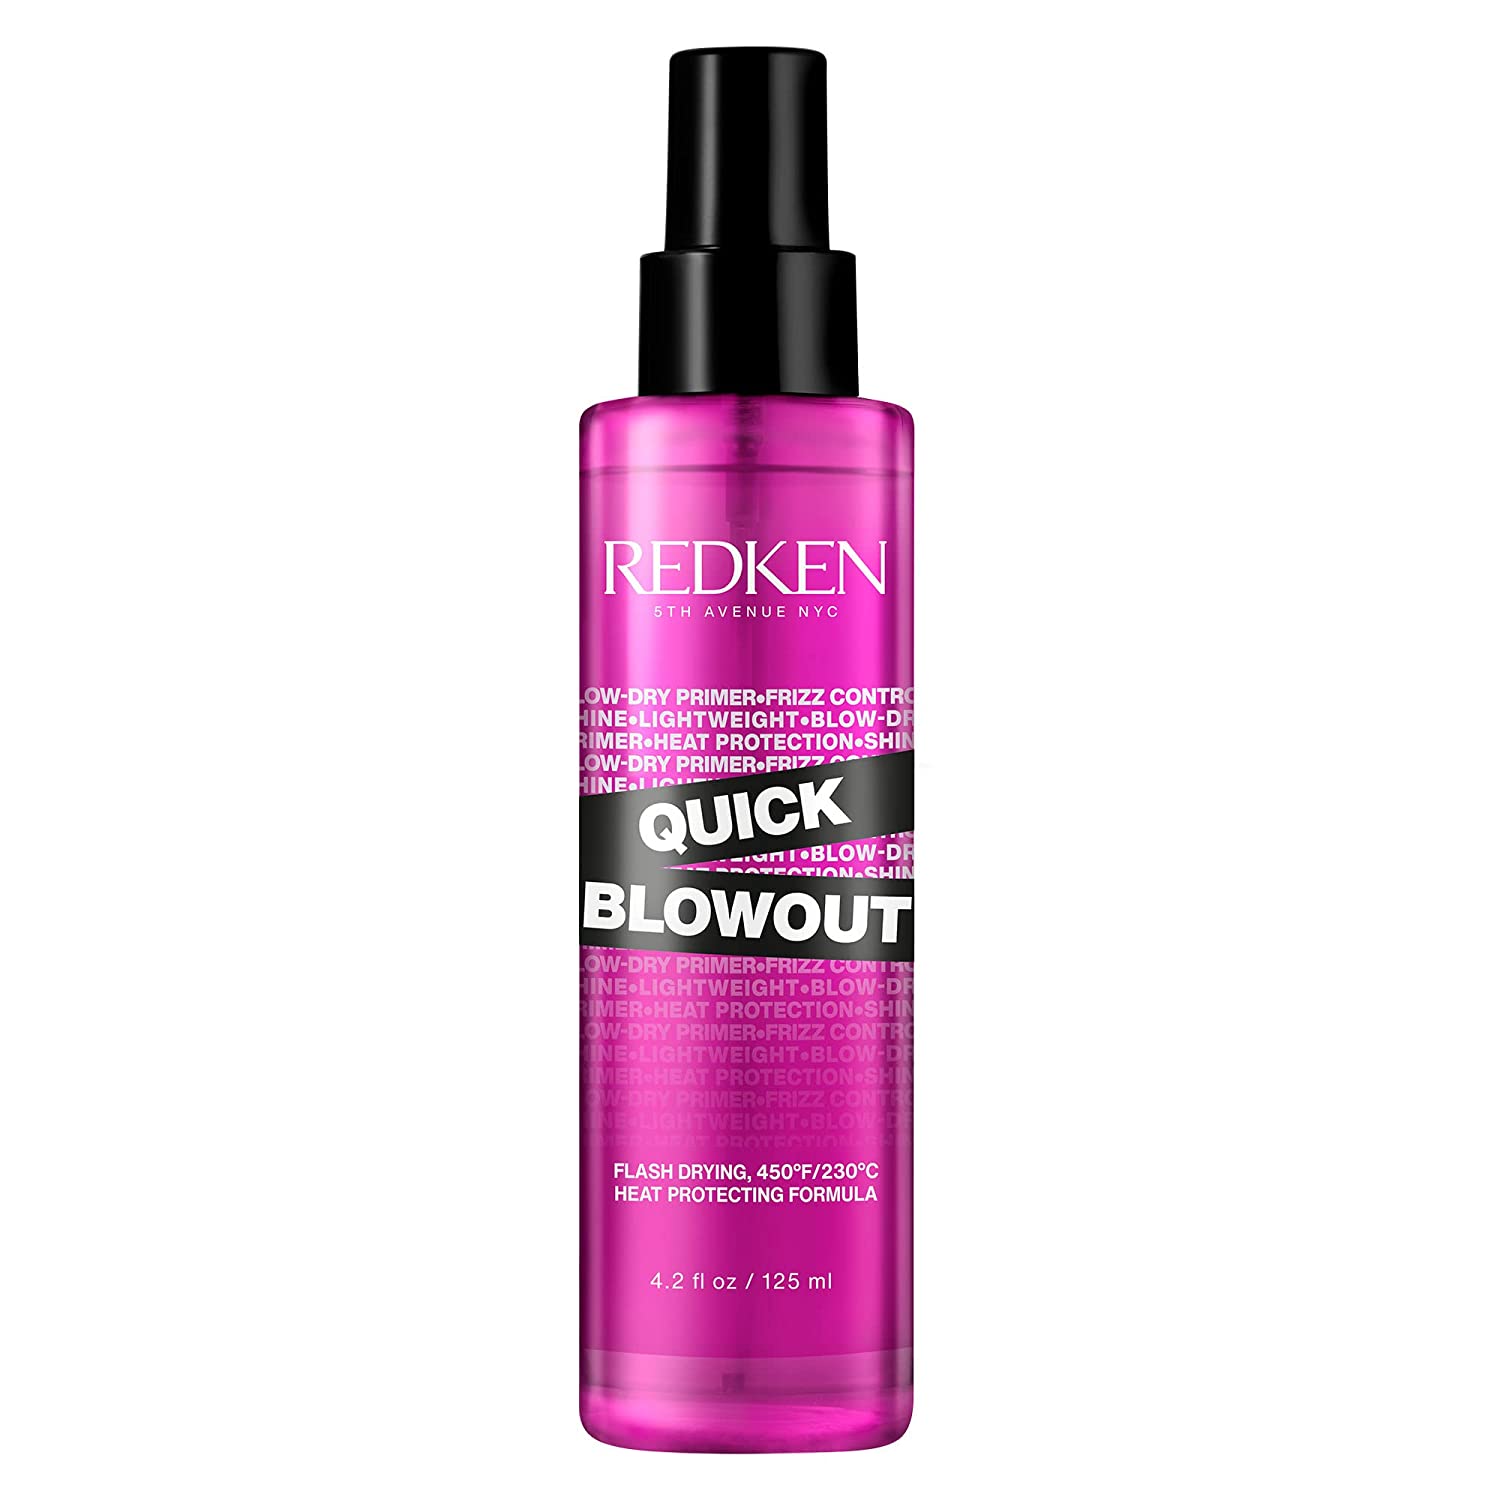 Redken Quick Blowout Heat Protection Spray | Blow Dry [...]